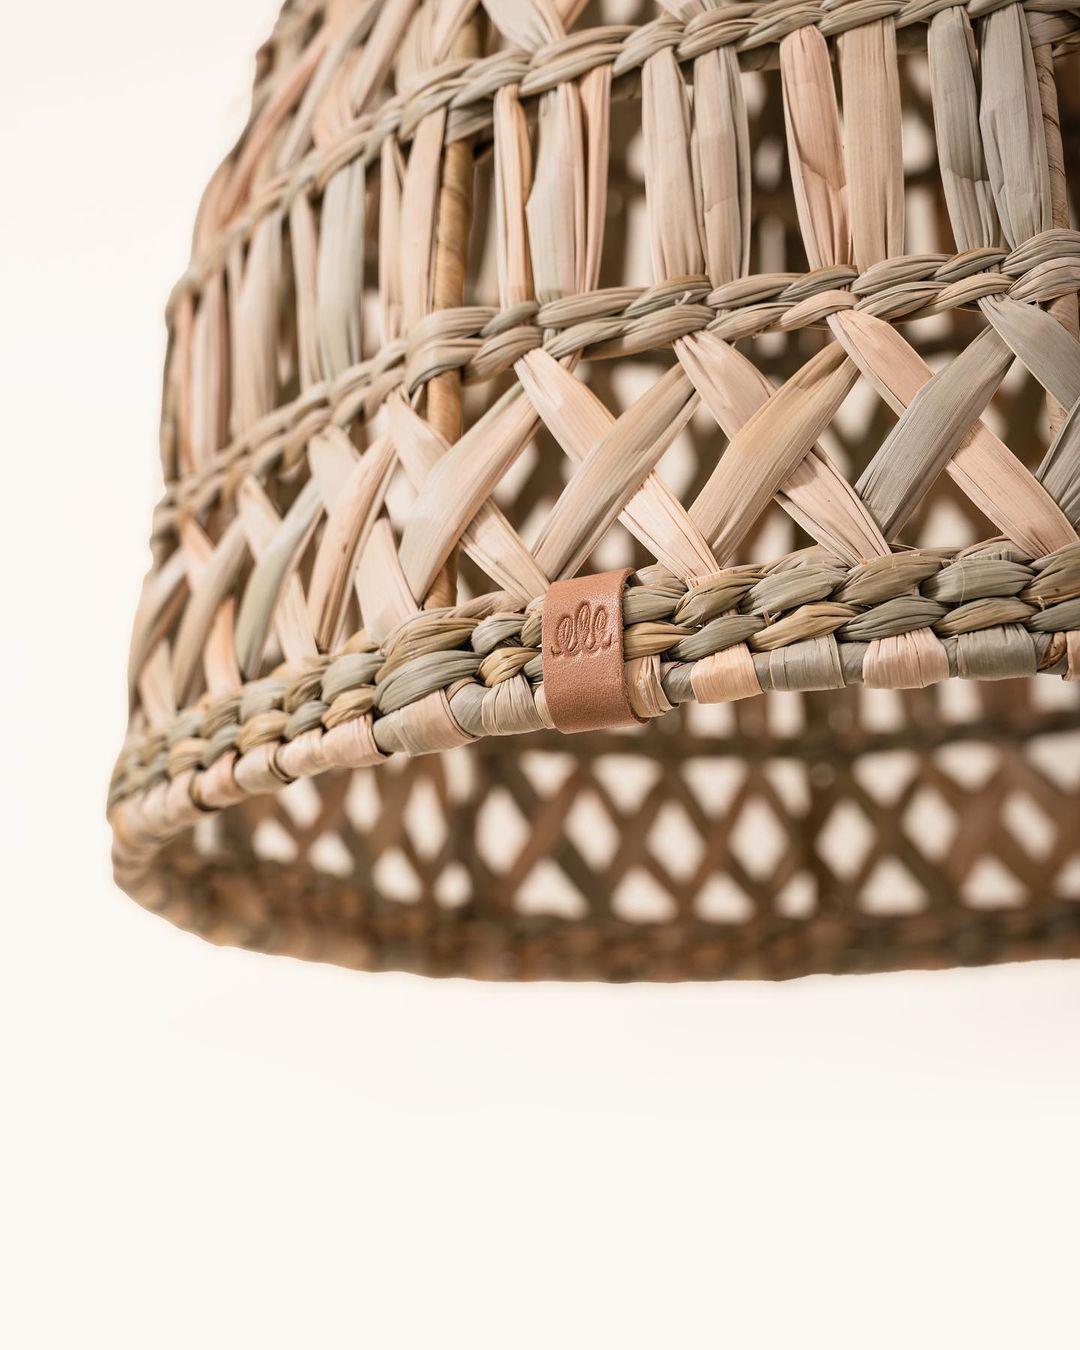 Rattan Maruata Handwoven Dried Palm Pendant Lampshade 22inx24in For Sale